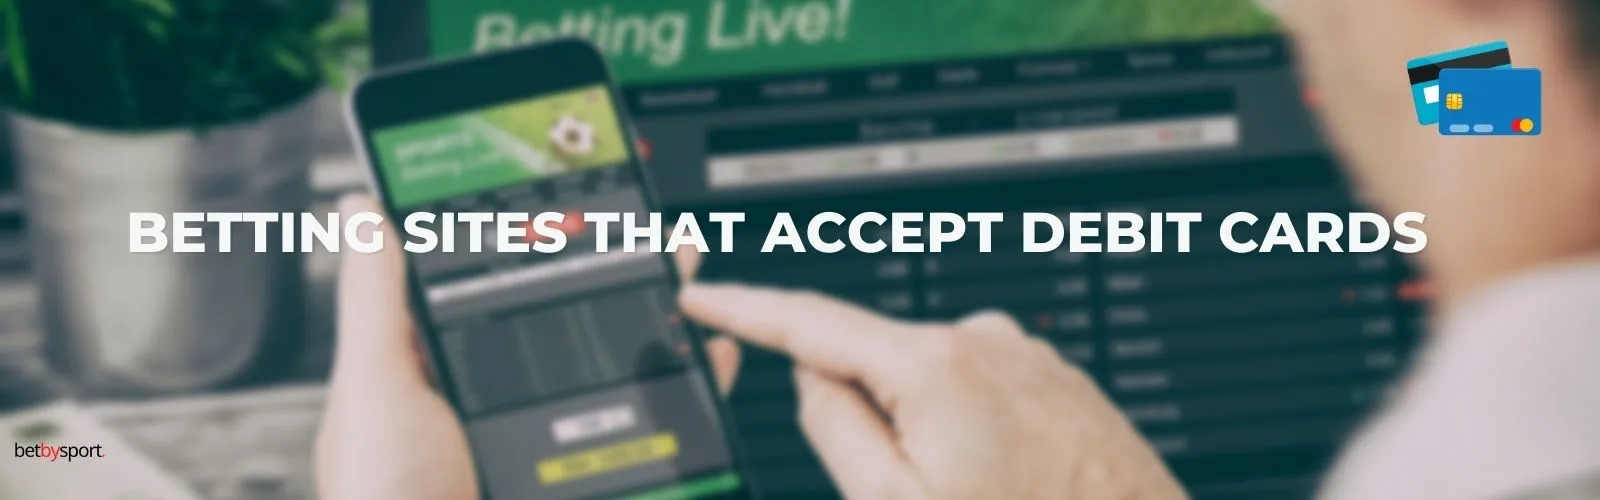 Betting Sites That Accept Debit Cards